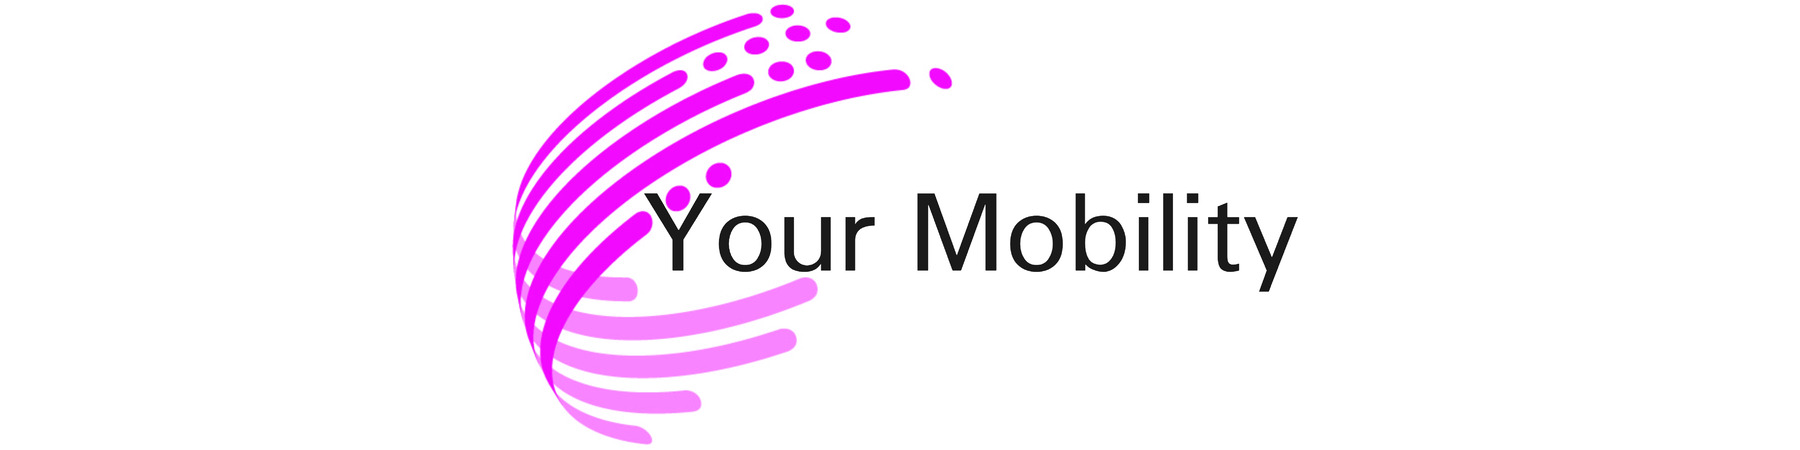 Your Mobility logo